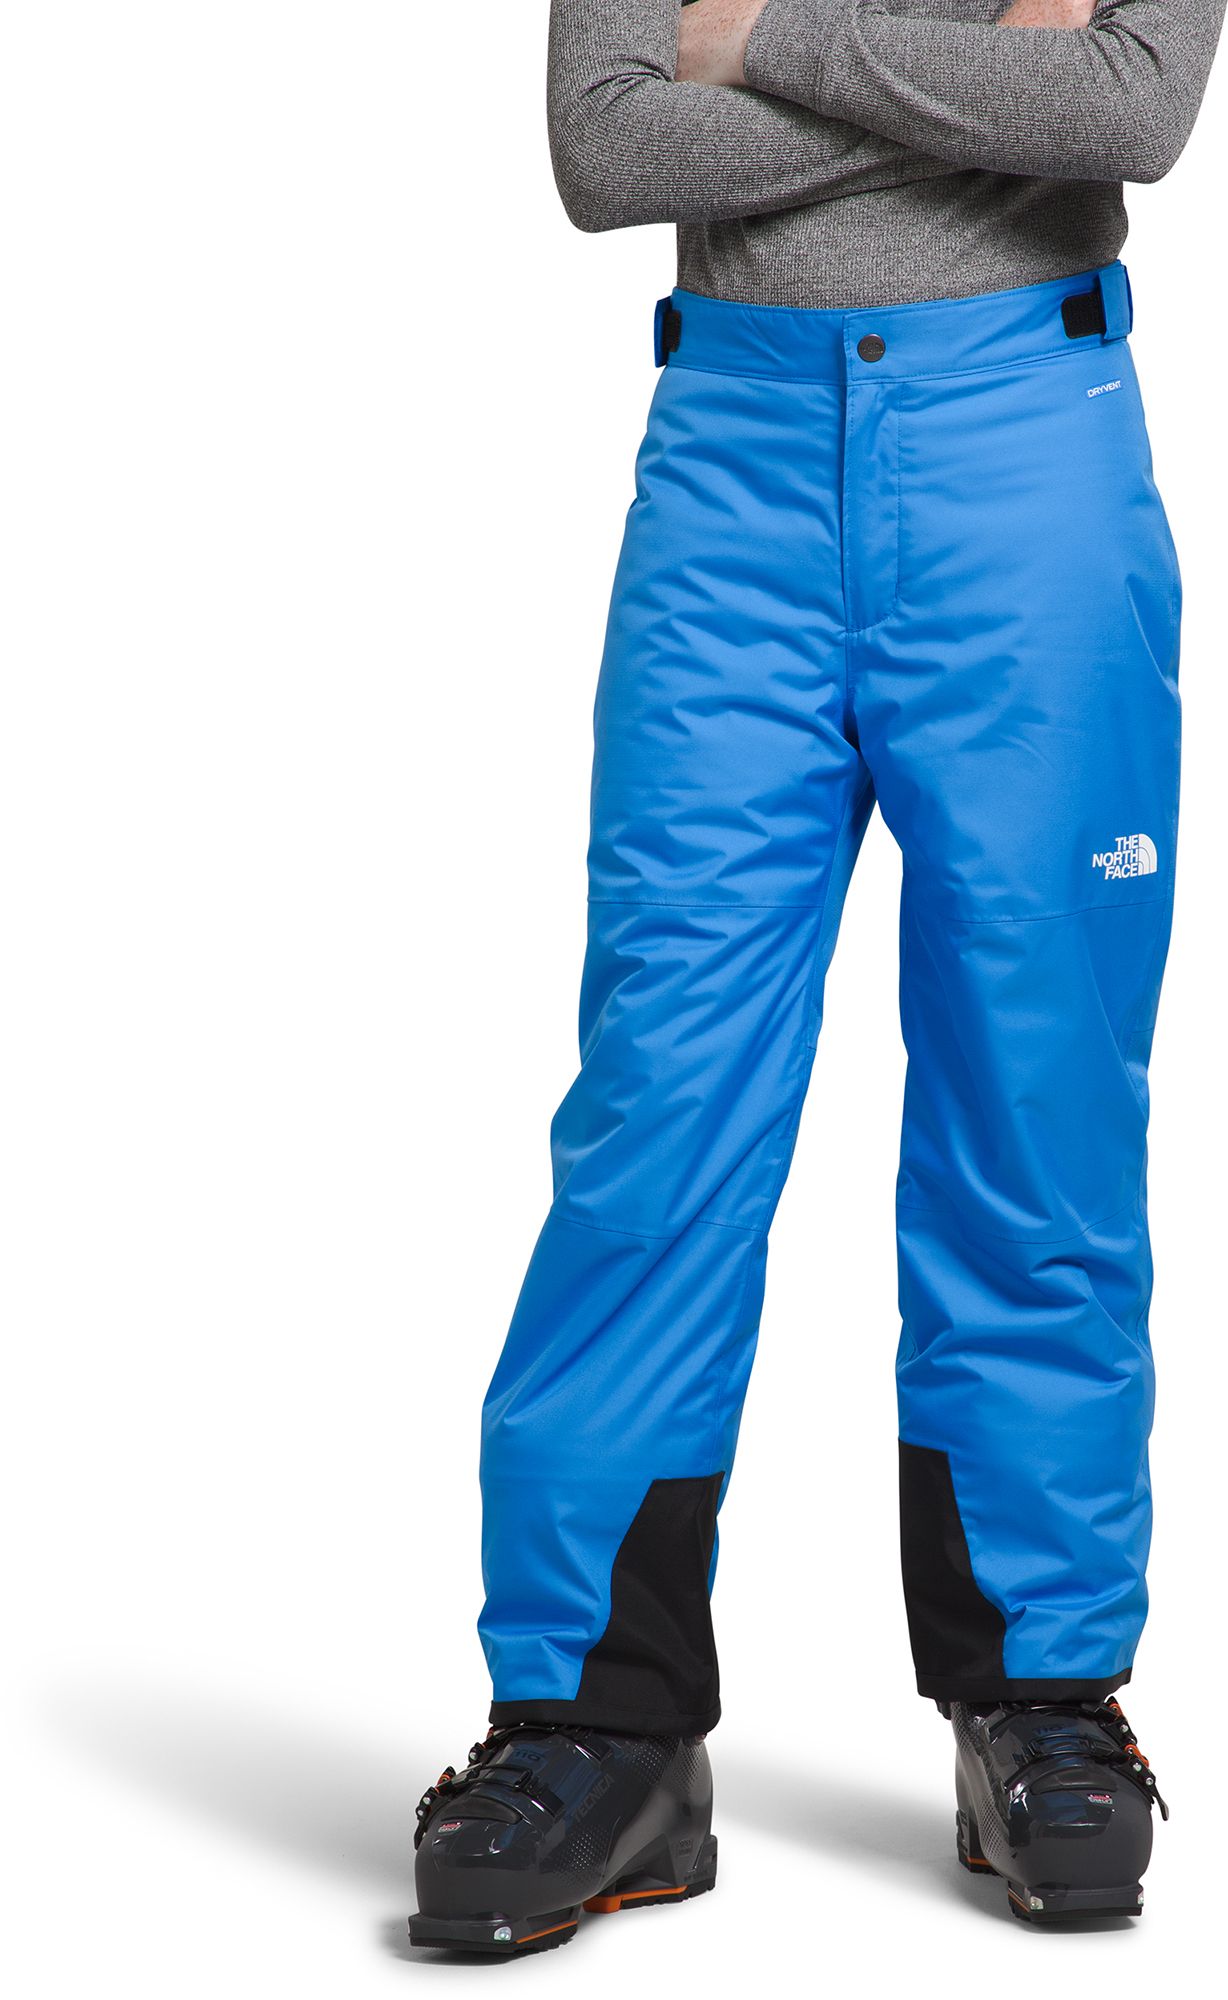 Photos - Ski Wear The North Face Boys' Freedom Insulated Pant, Large, Optic Blue 23TNOBBFRDM 